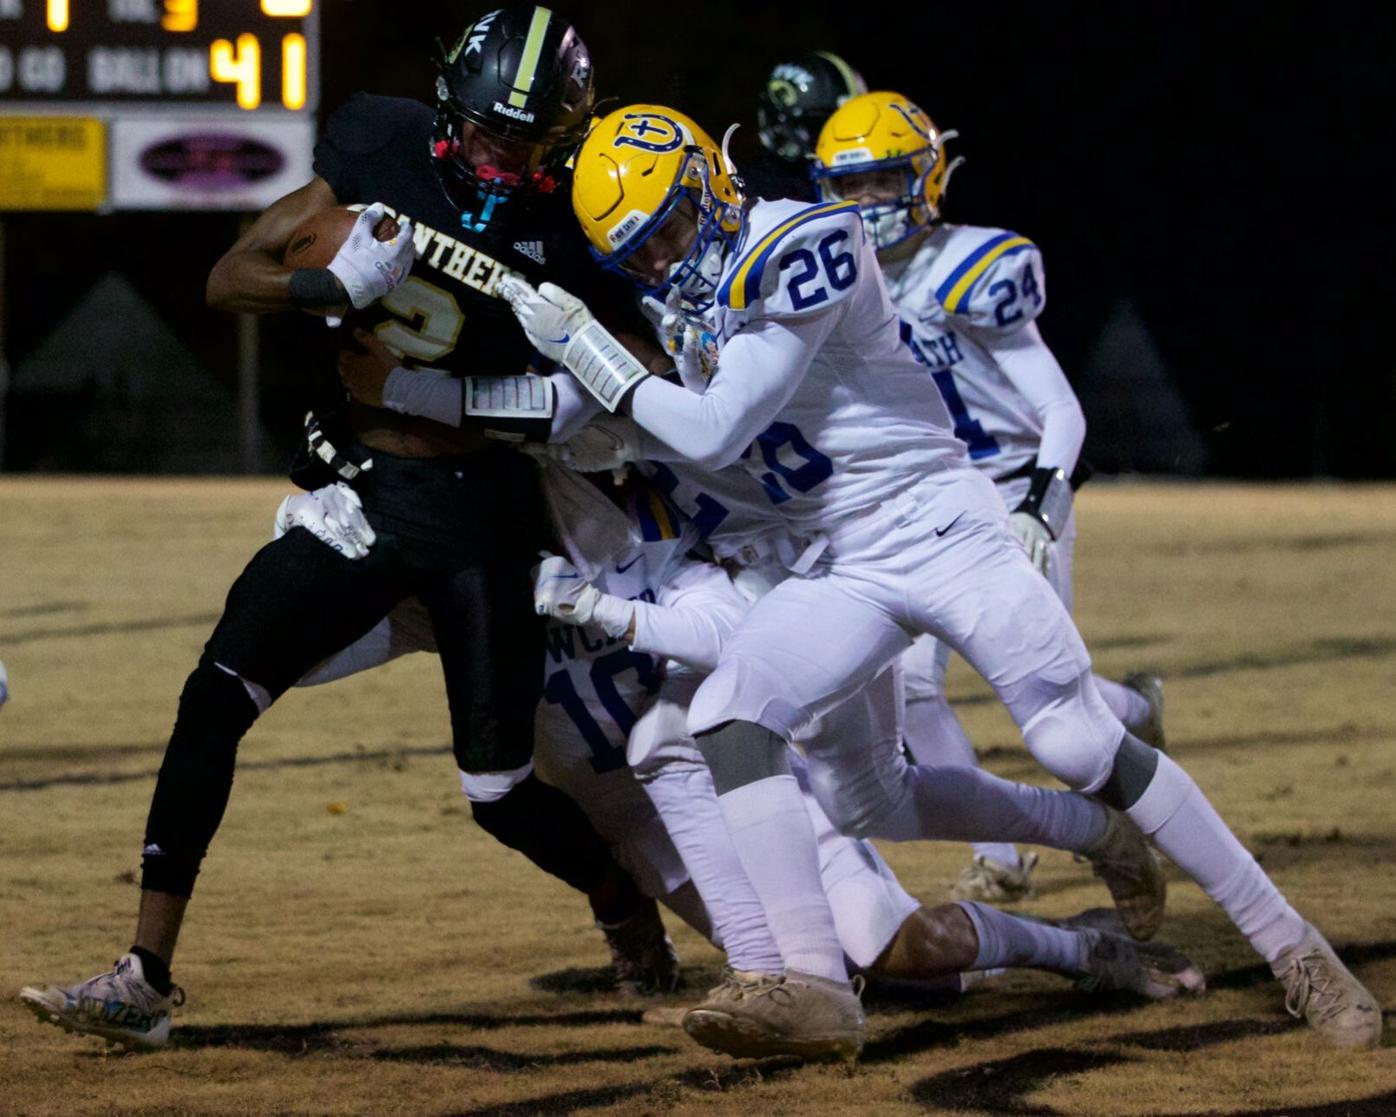 211119-sports- Newport Central Catholic at Russellville 1A Football_outbound 1.jpg